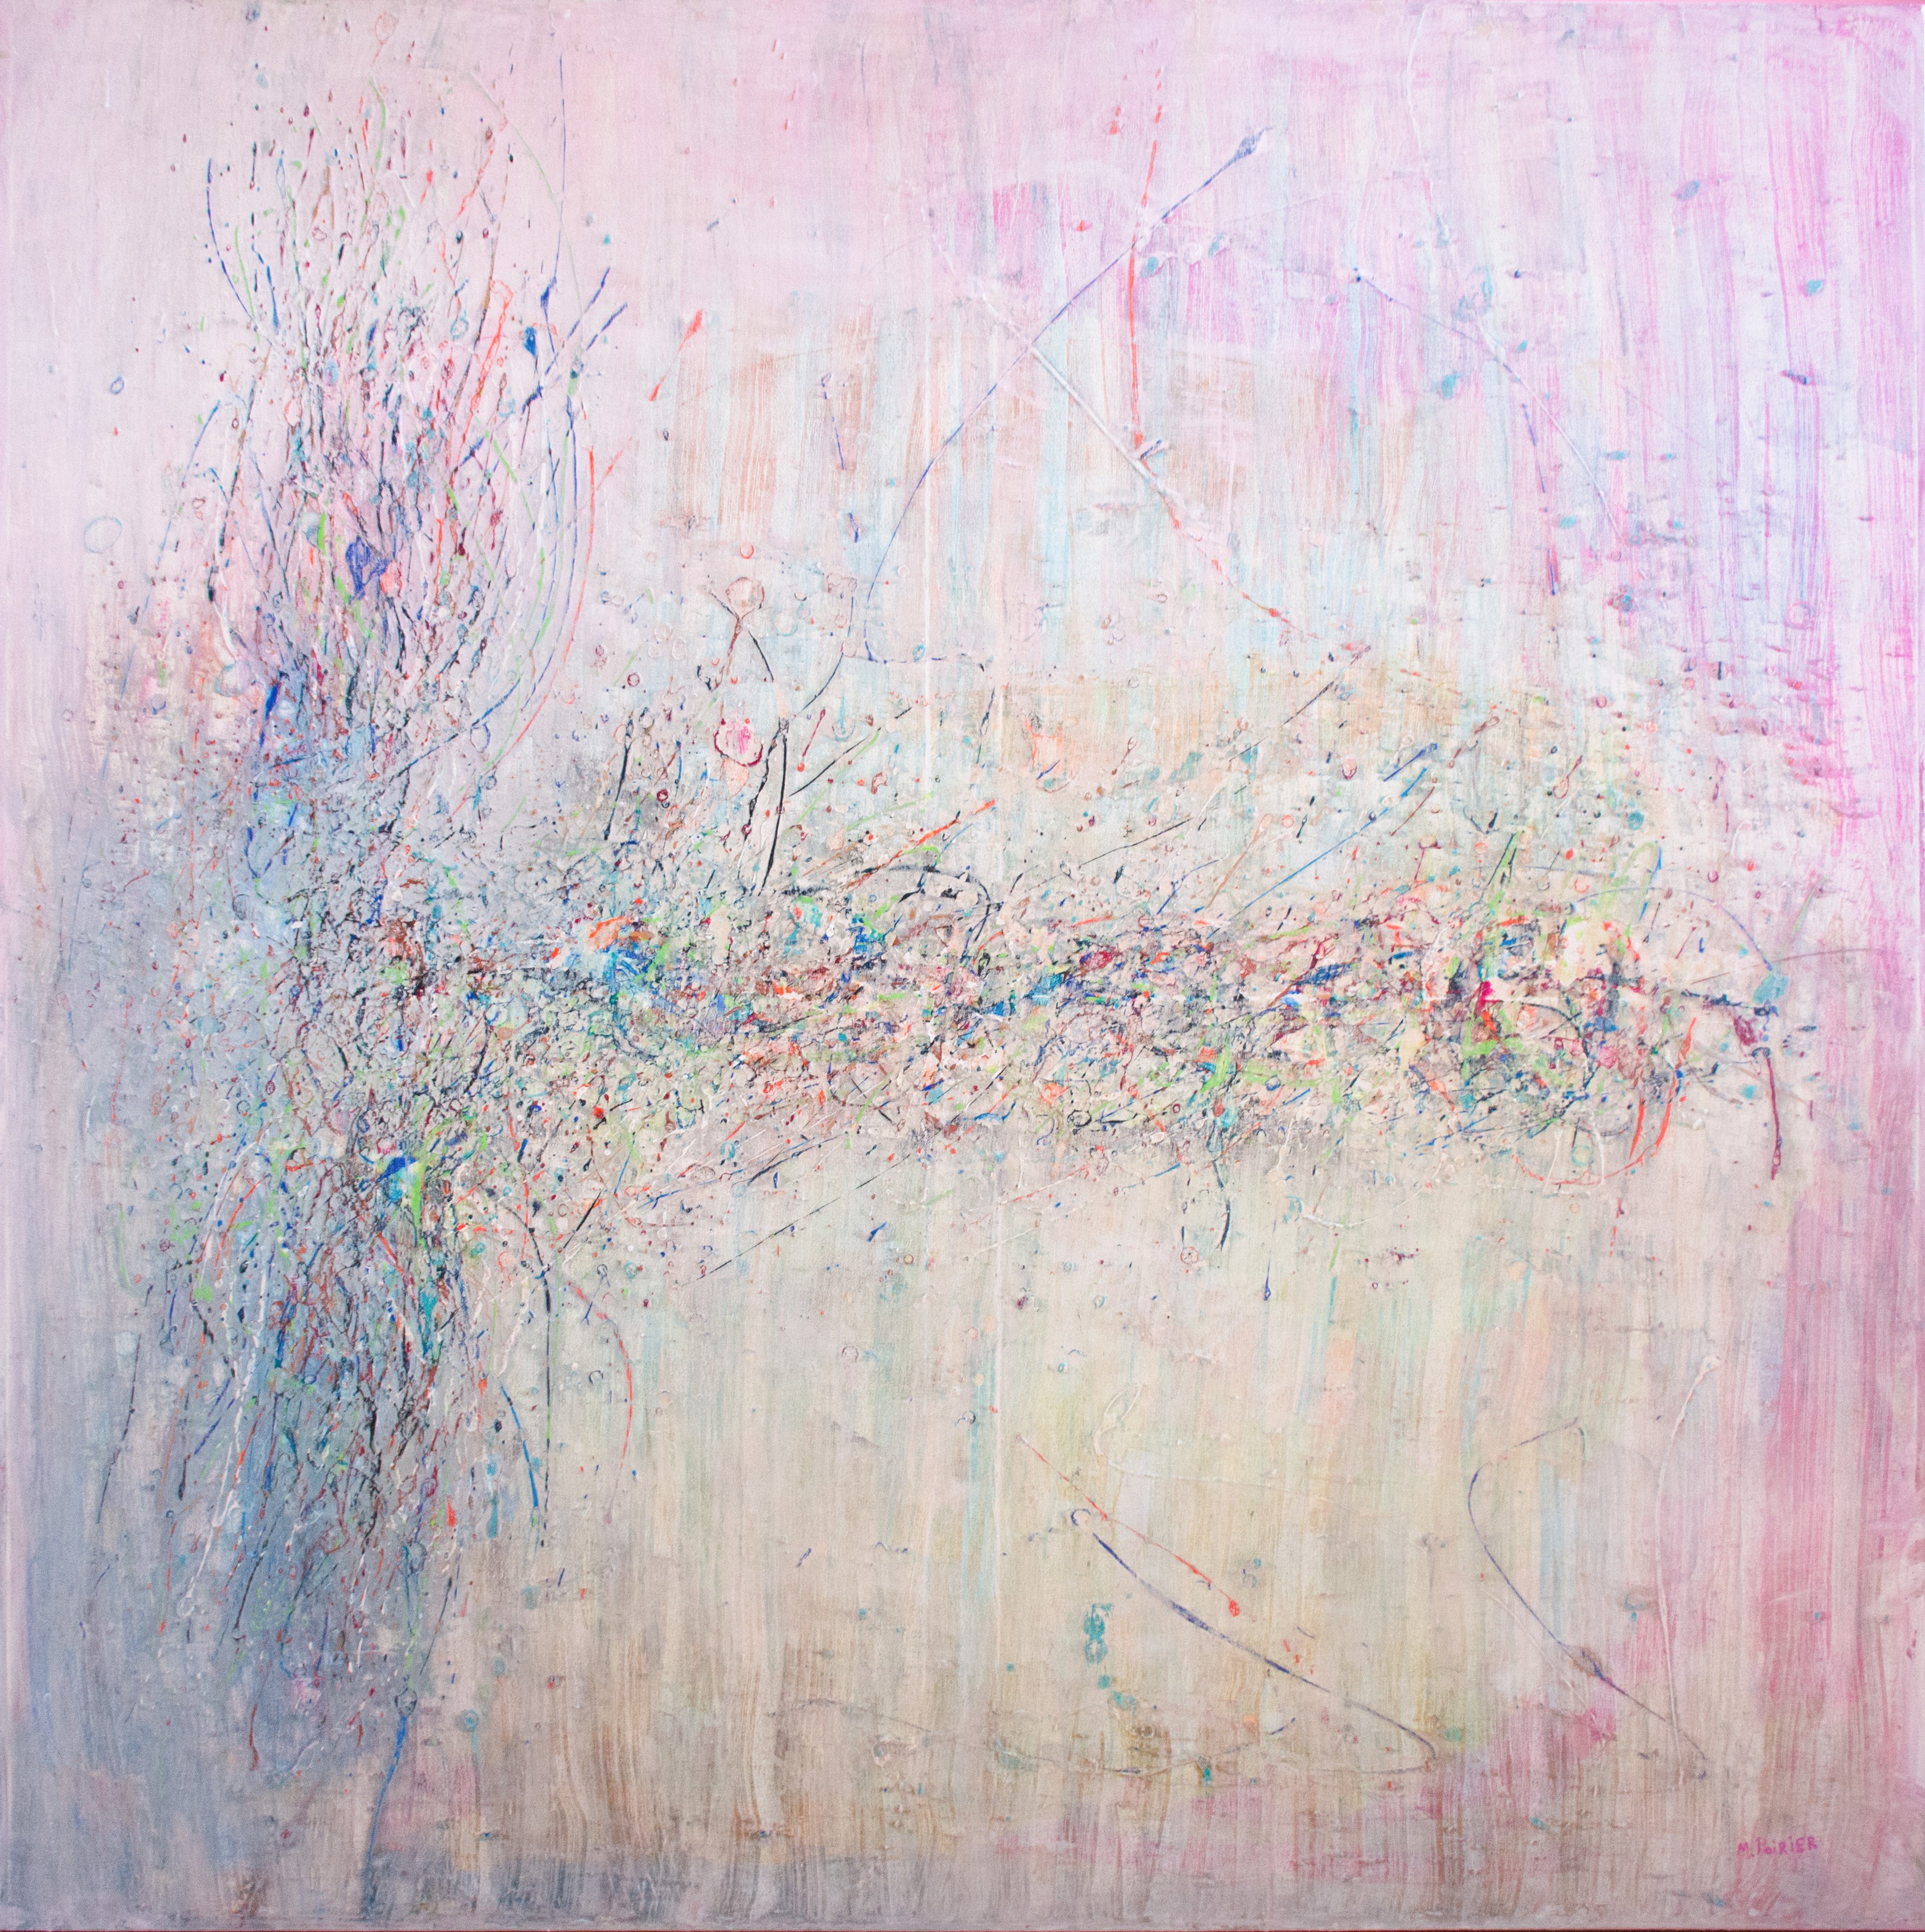 REFLECTION
48x48 inches, 122x122 centimeters